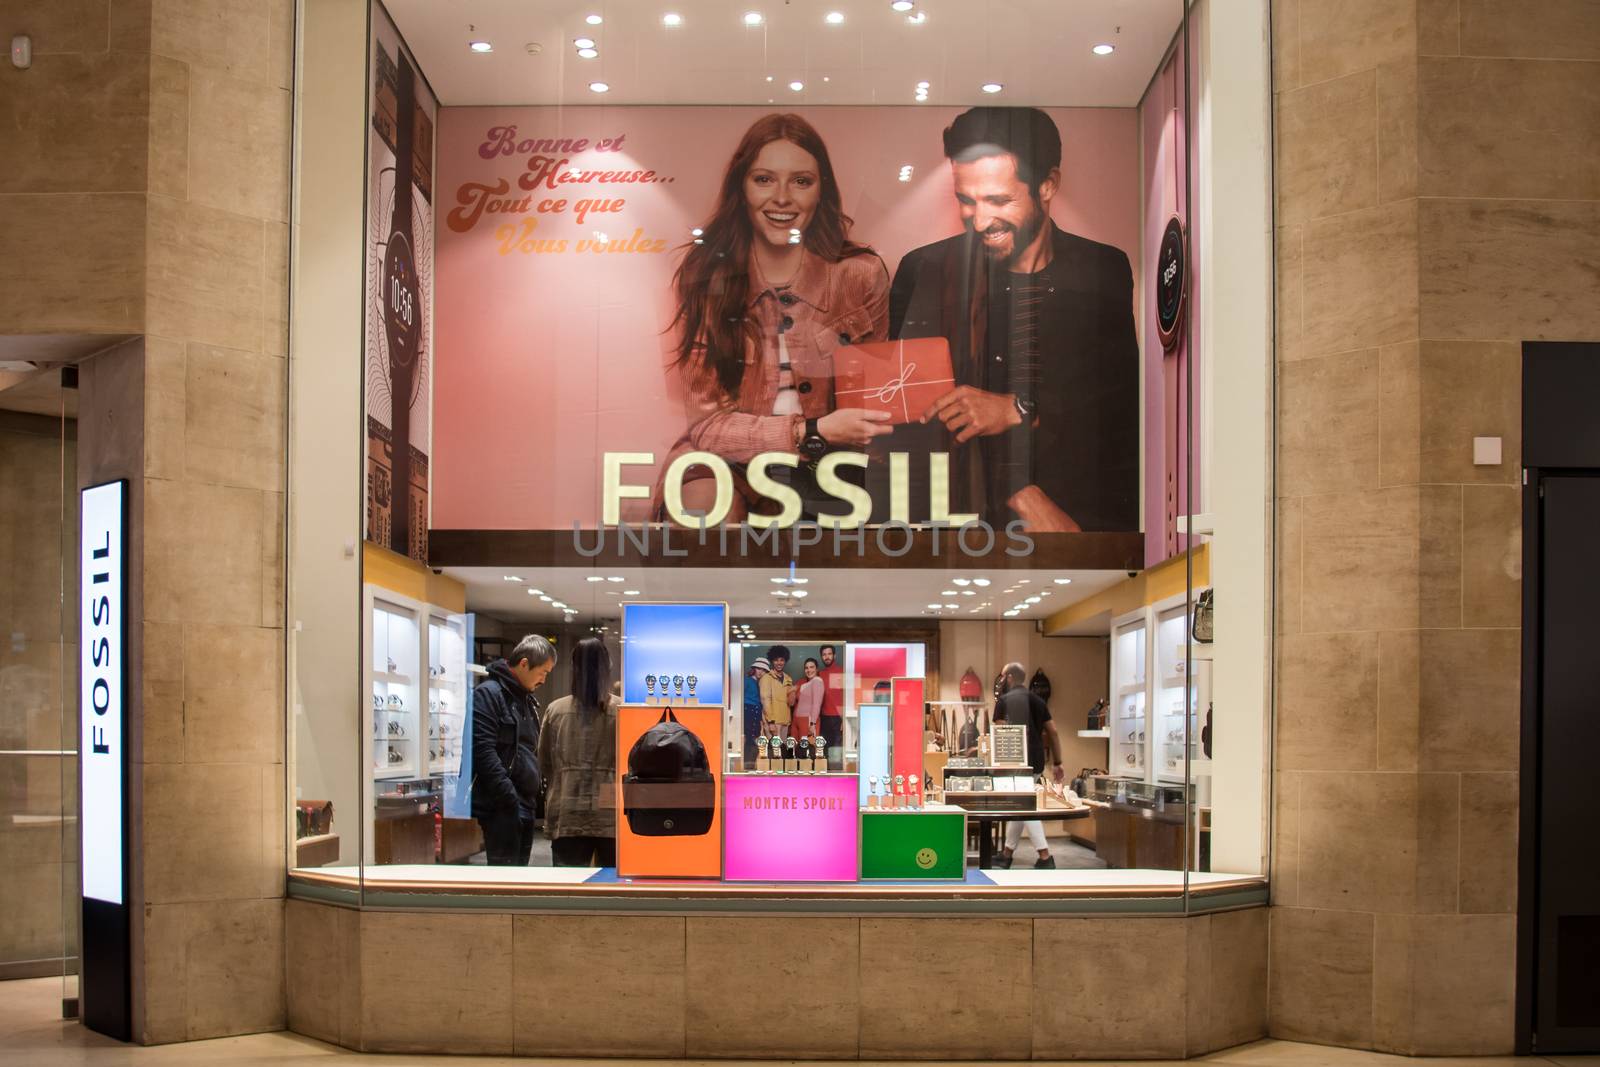 FOSSIL Store in Paris, France, watches brand shop in "Le Louvre" by ontheroadagain